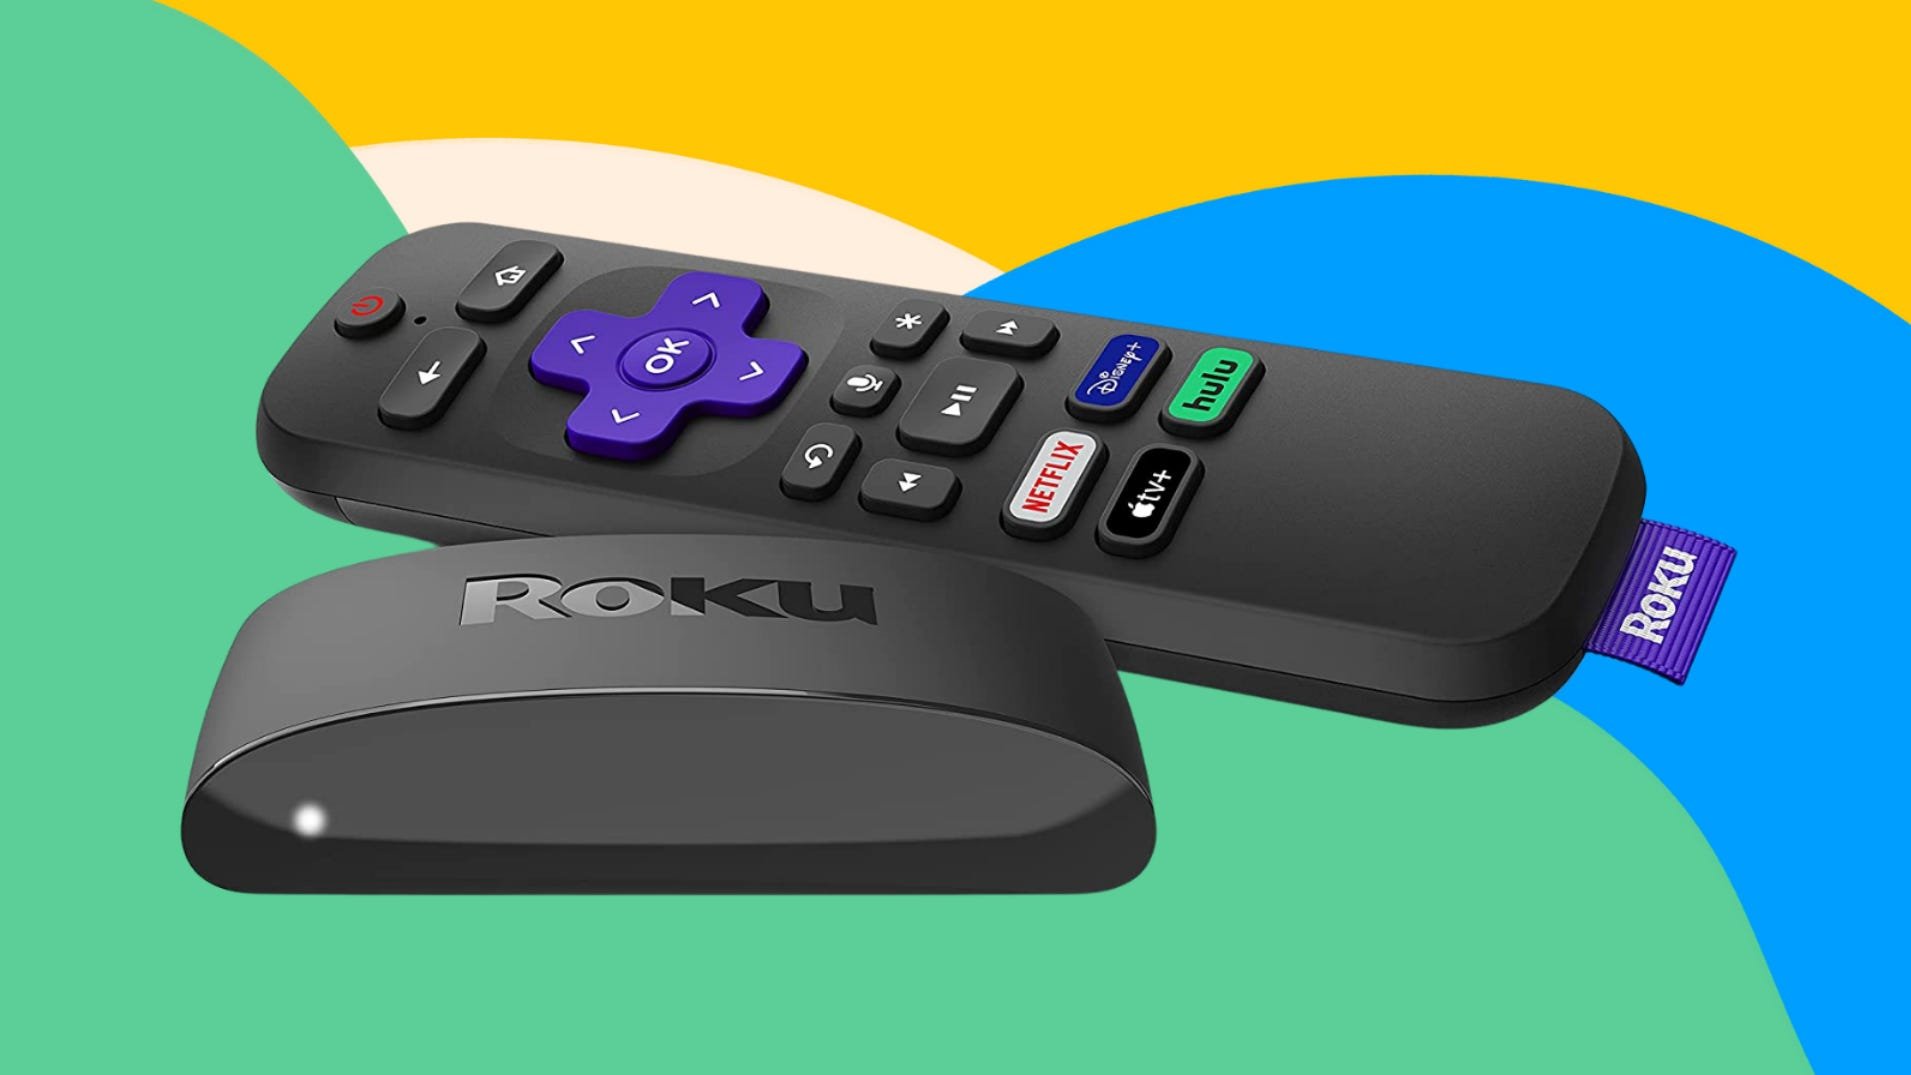 Prime Day 2021: Save on our favorite Roku streaming stick devices